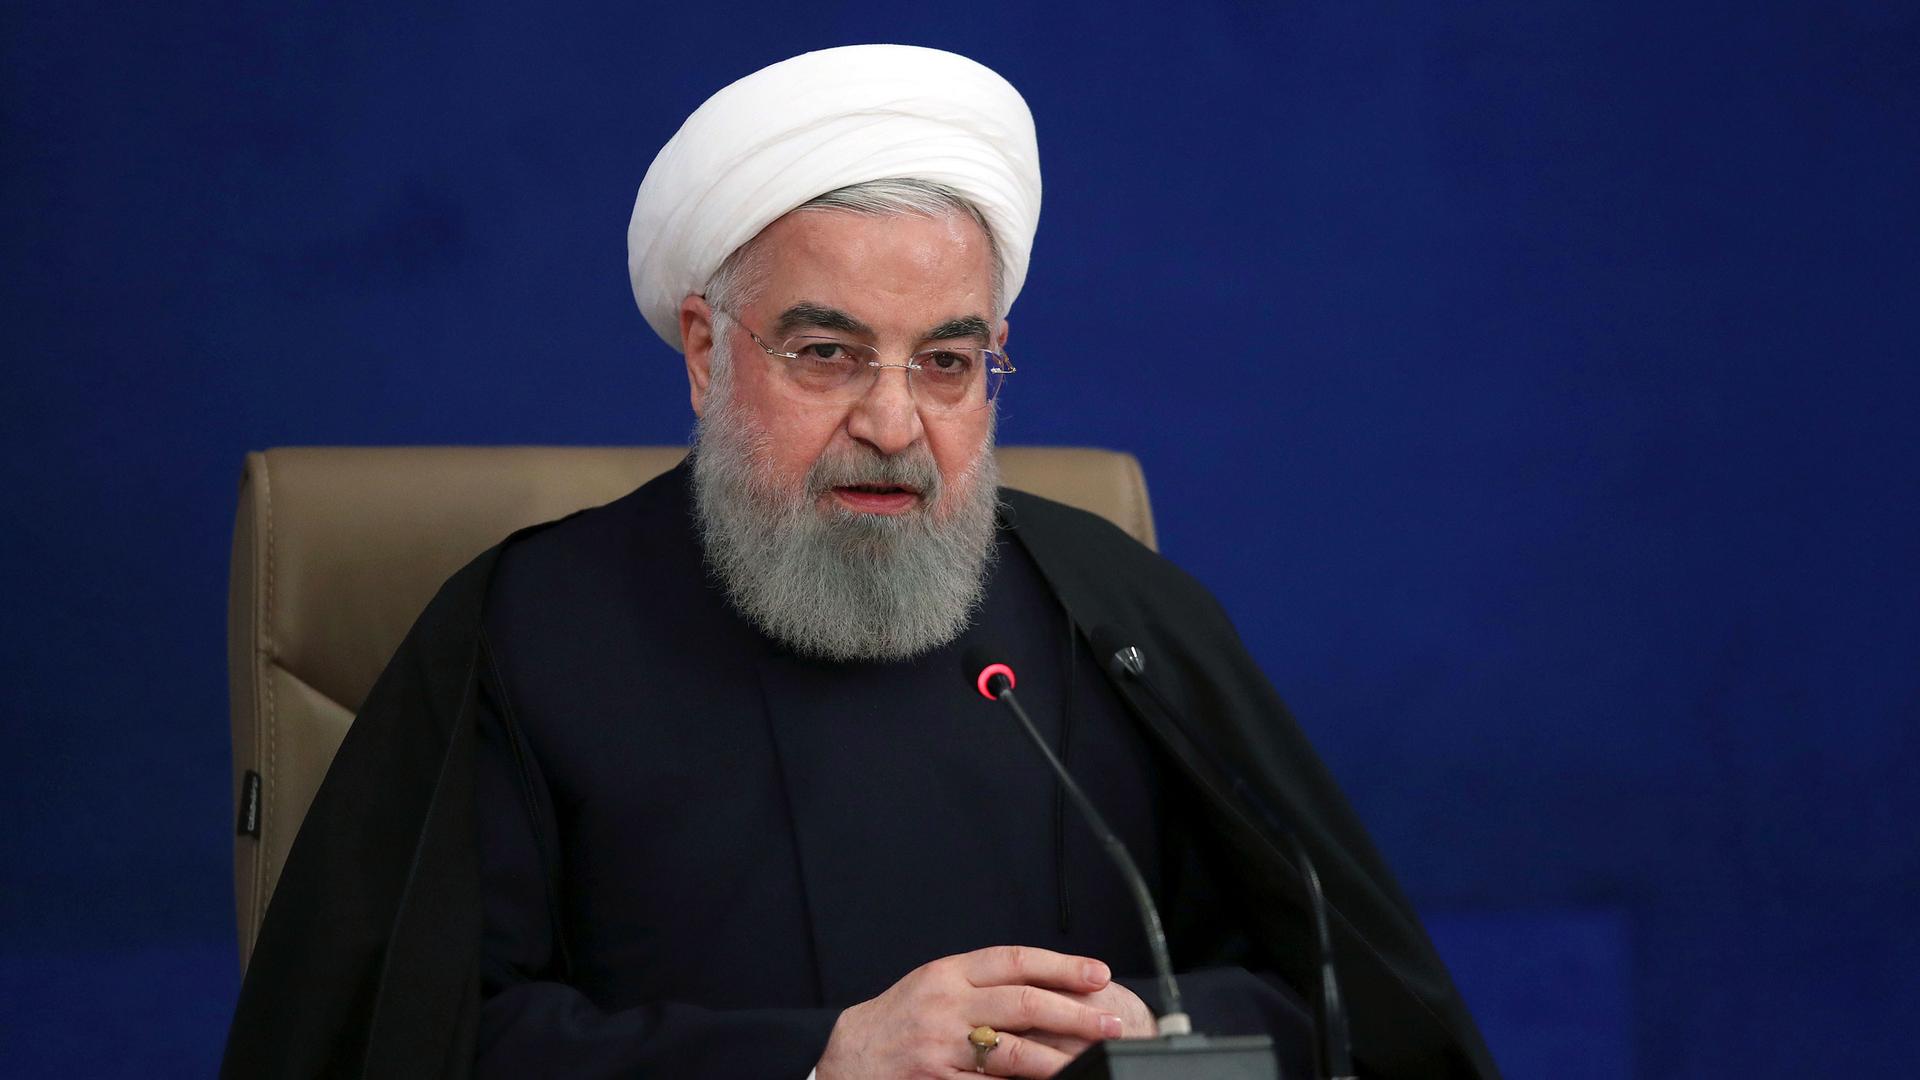 Iranian President Hassan Rouhani is shown wearing a traditional white turban while sitting behind a microphone.